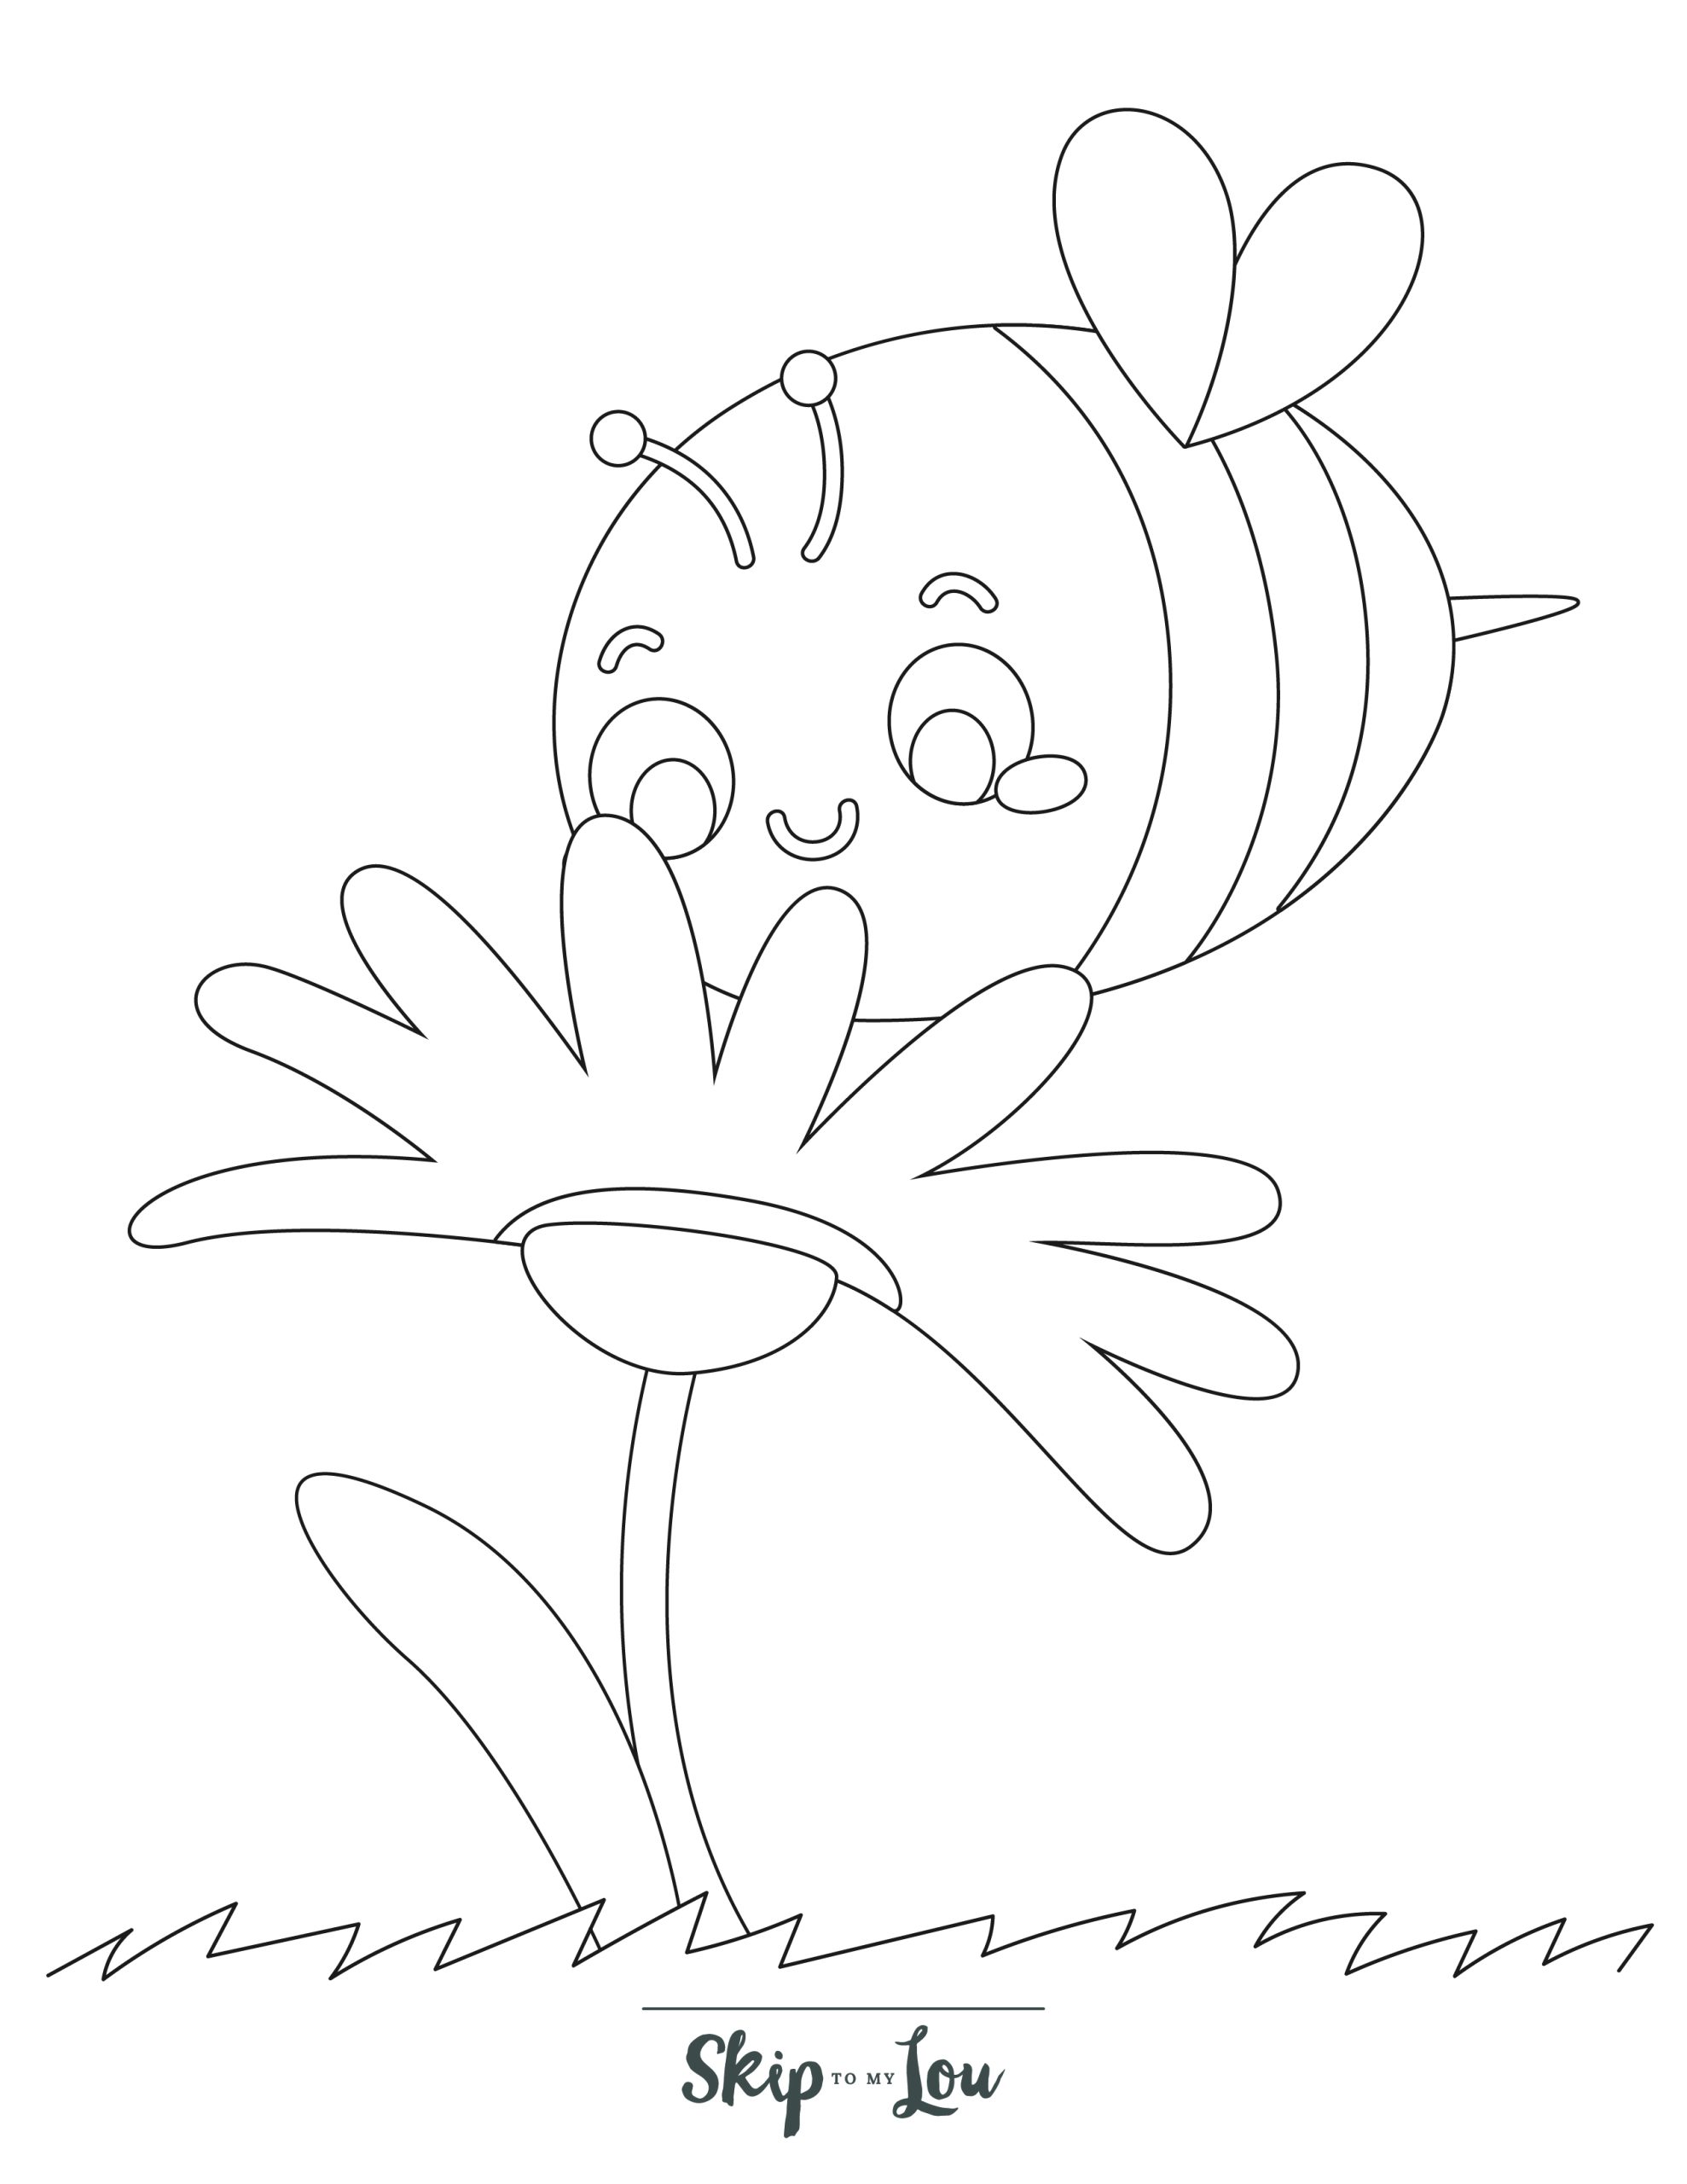 Preschool Coloring Page 1 - Simple line drawing of a bumblebee sniffing a flower